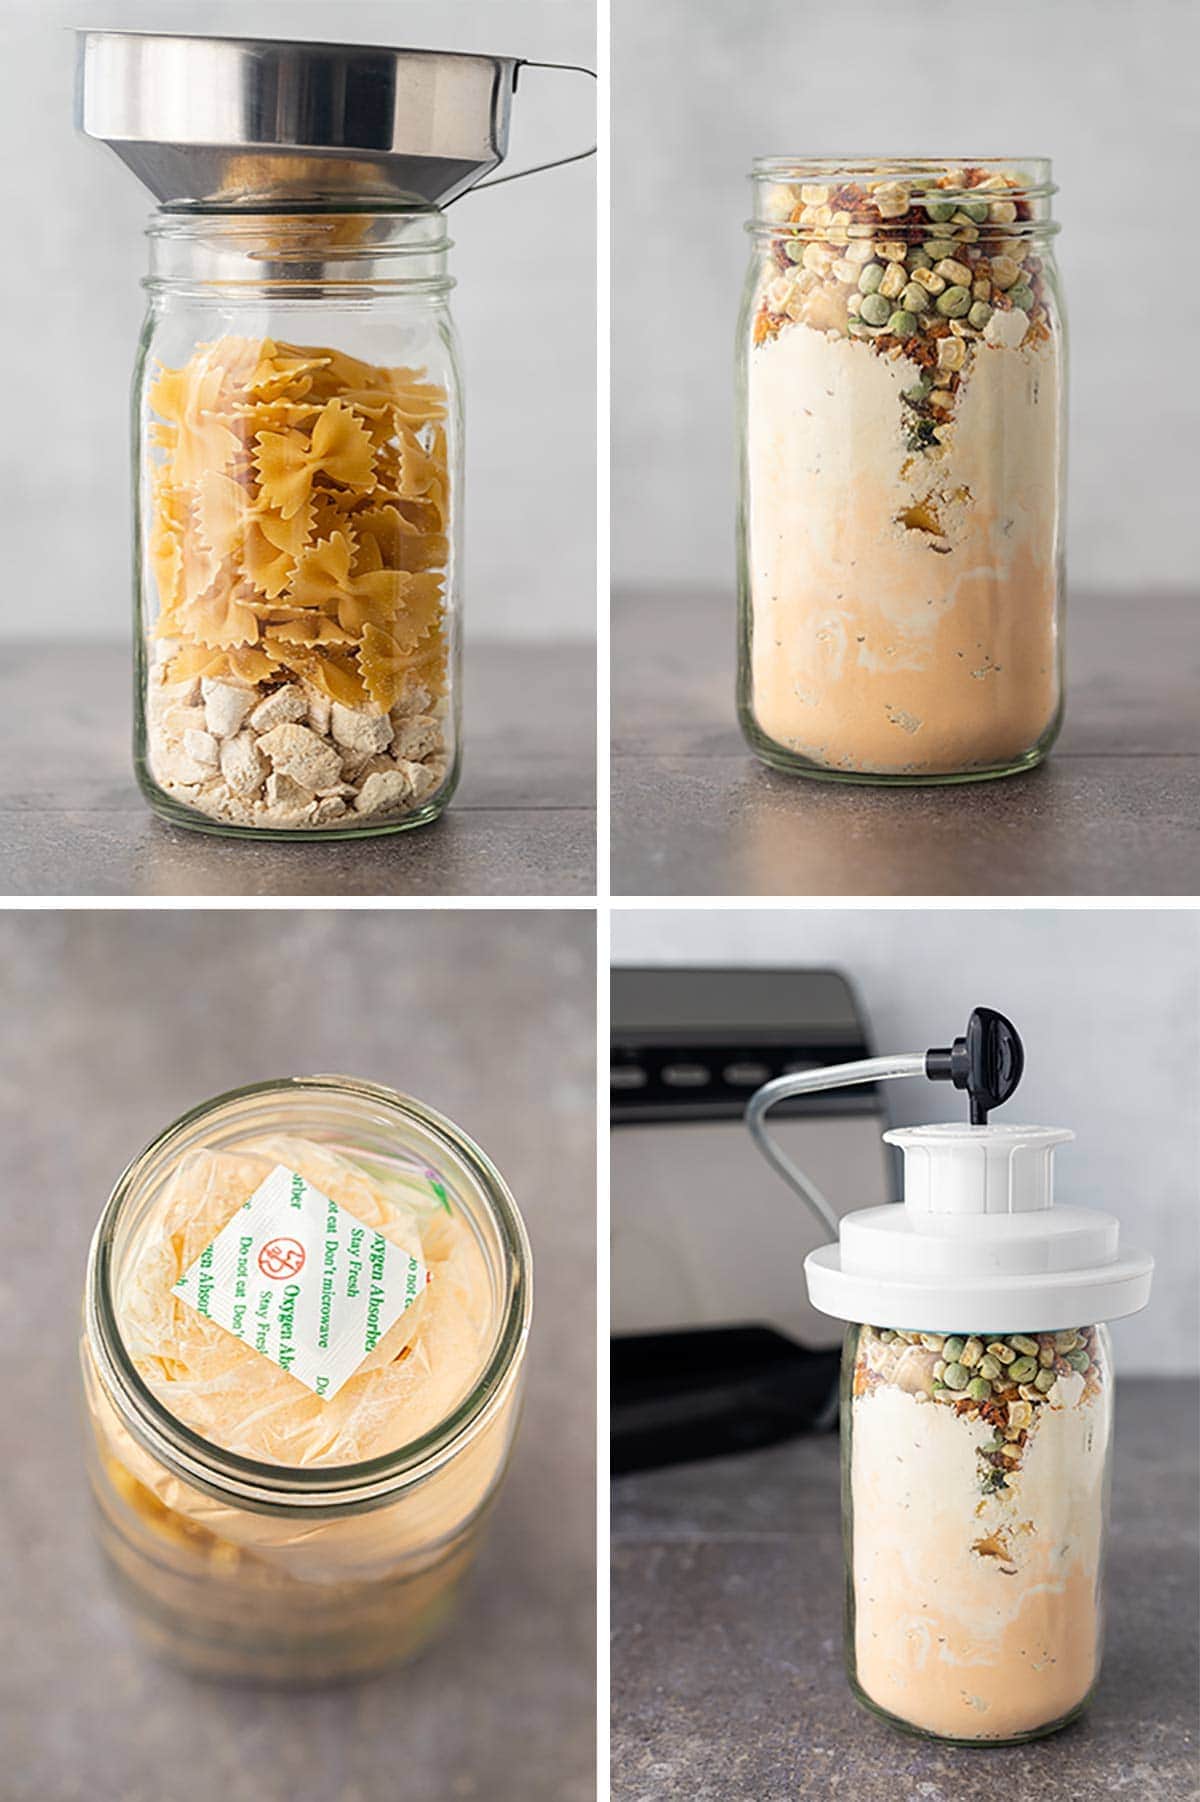 Collage of process steps showing how to fill the jar to make Creamy Chicken Veggie Casserole meal in a jar and seal effectively.